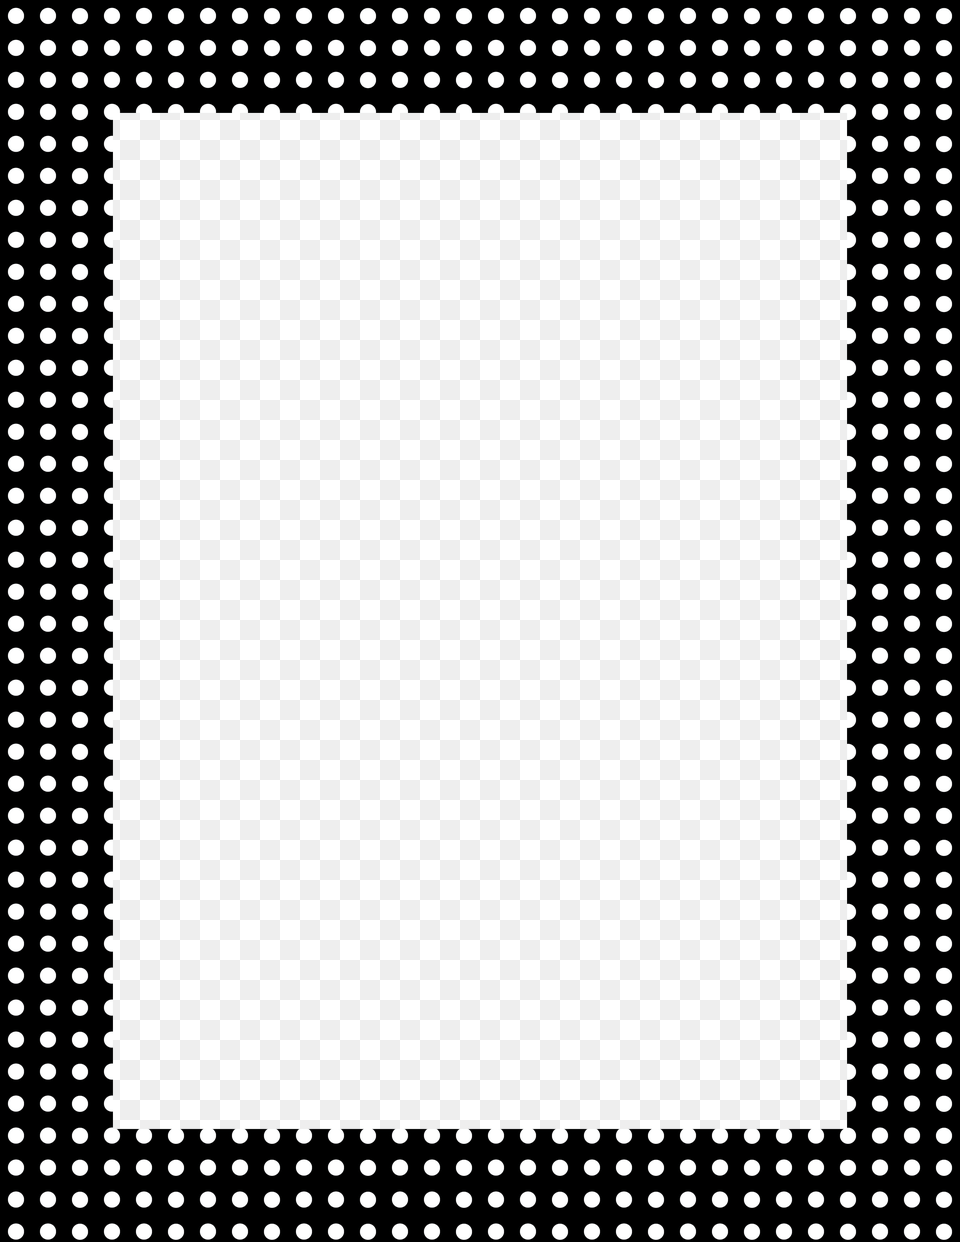 Frame Zwarte Ruit 3d Paper Snowflakes Borders For Tongue Twister With Er Sound, Pattern, Blackboard, Polka Dot, Text Free Transparent Png